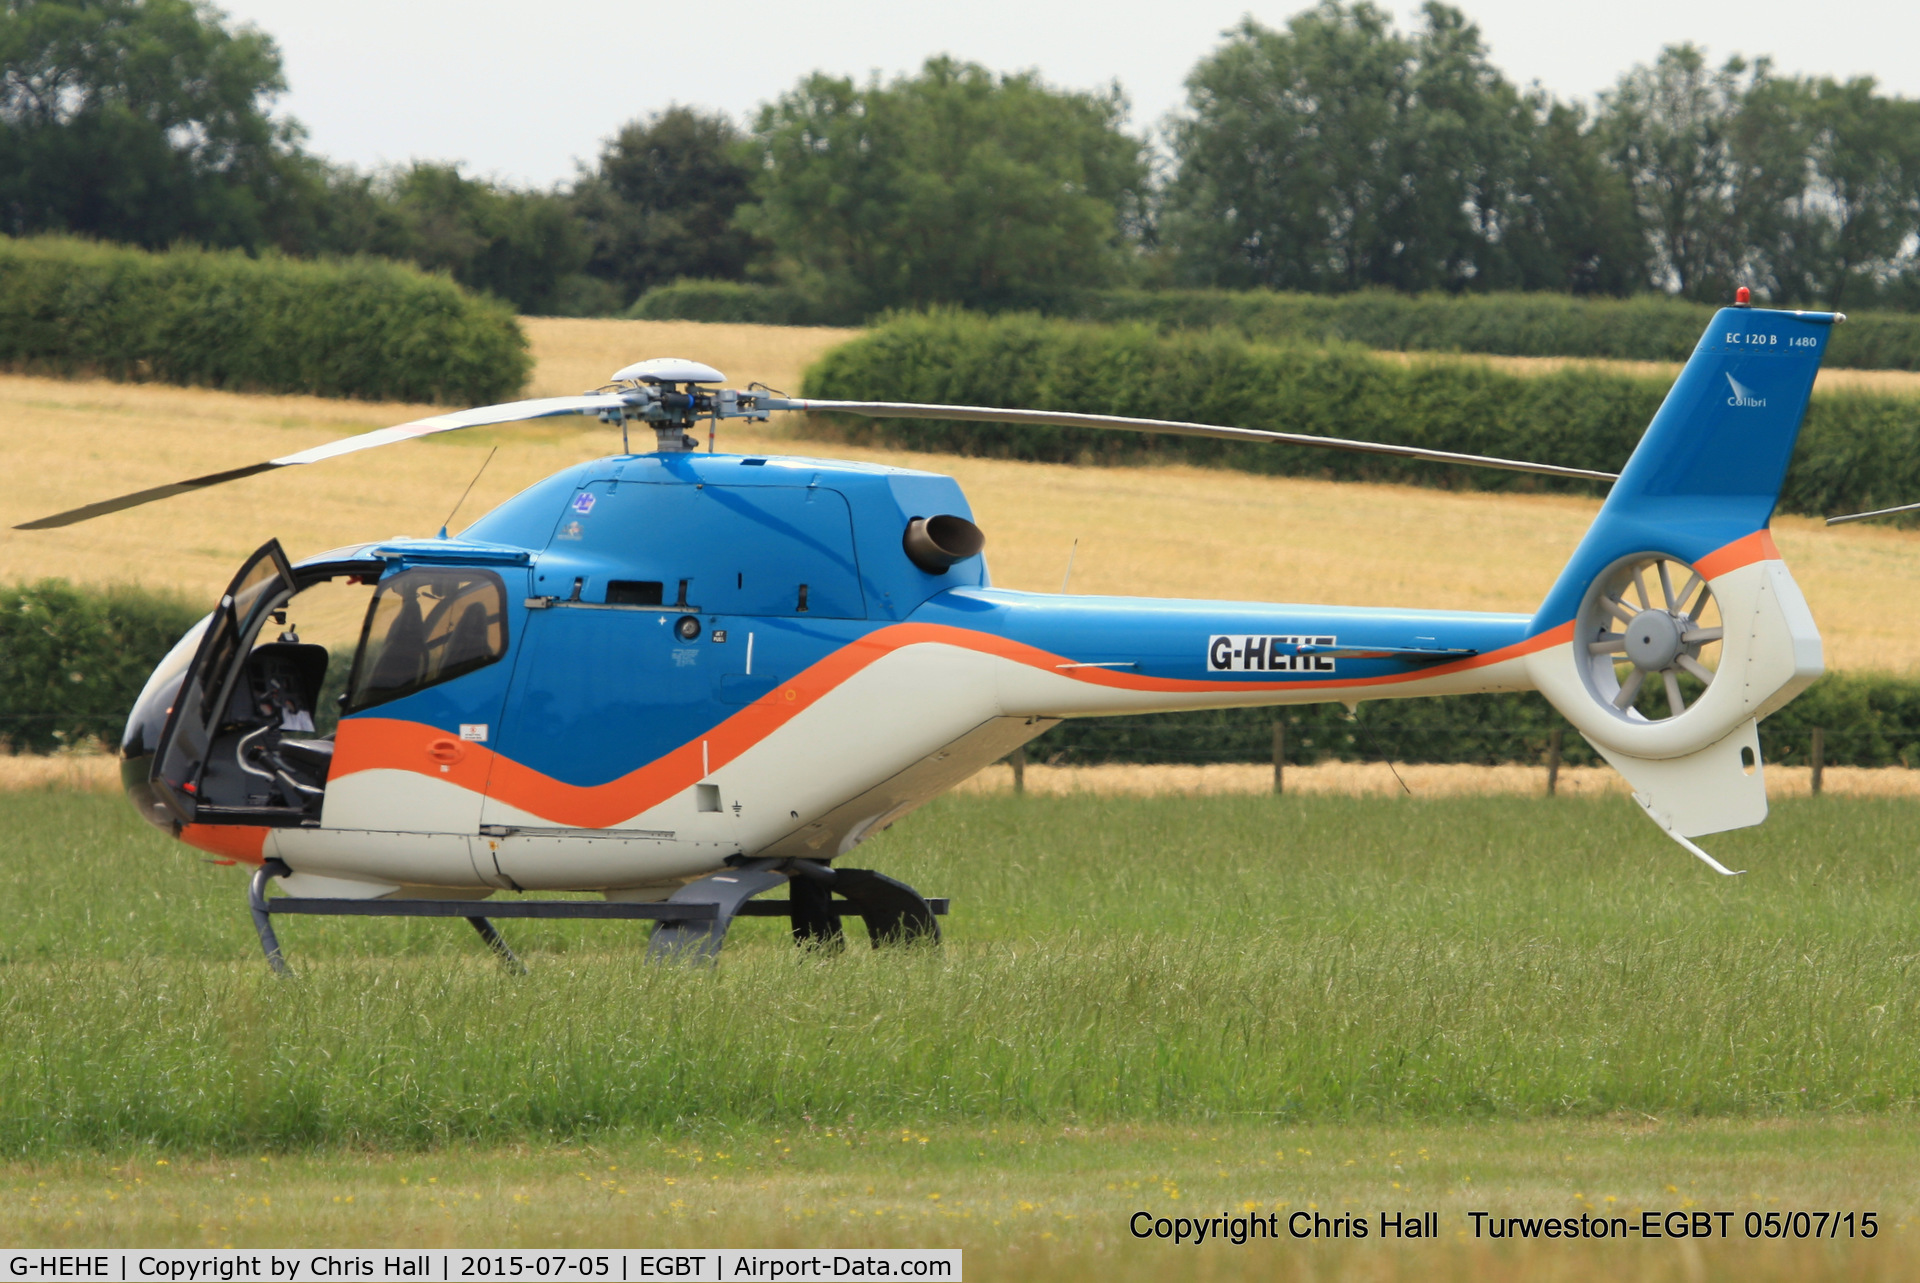 G-HEHE, 2007 Eurocopter EC-120B Colibri C/N 1480, ferrying race fans to the British F1 Grand Prix at Silverstone